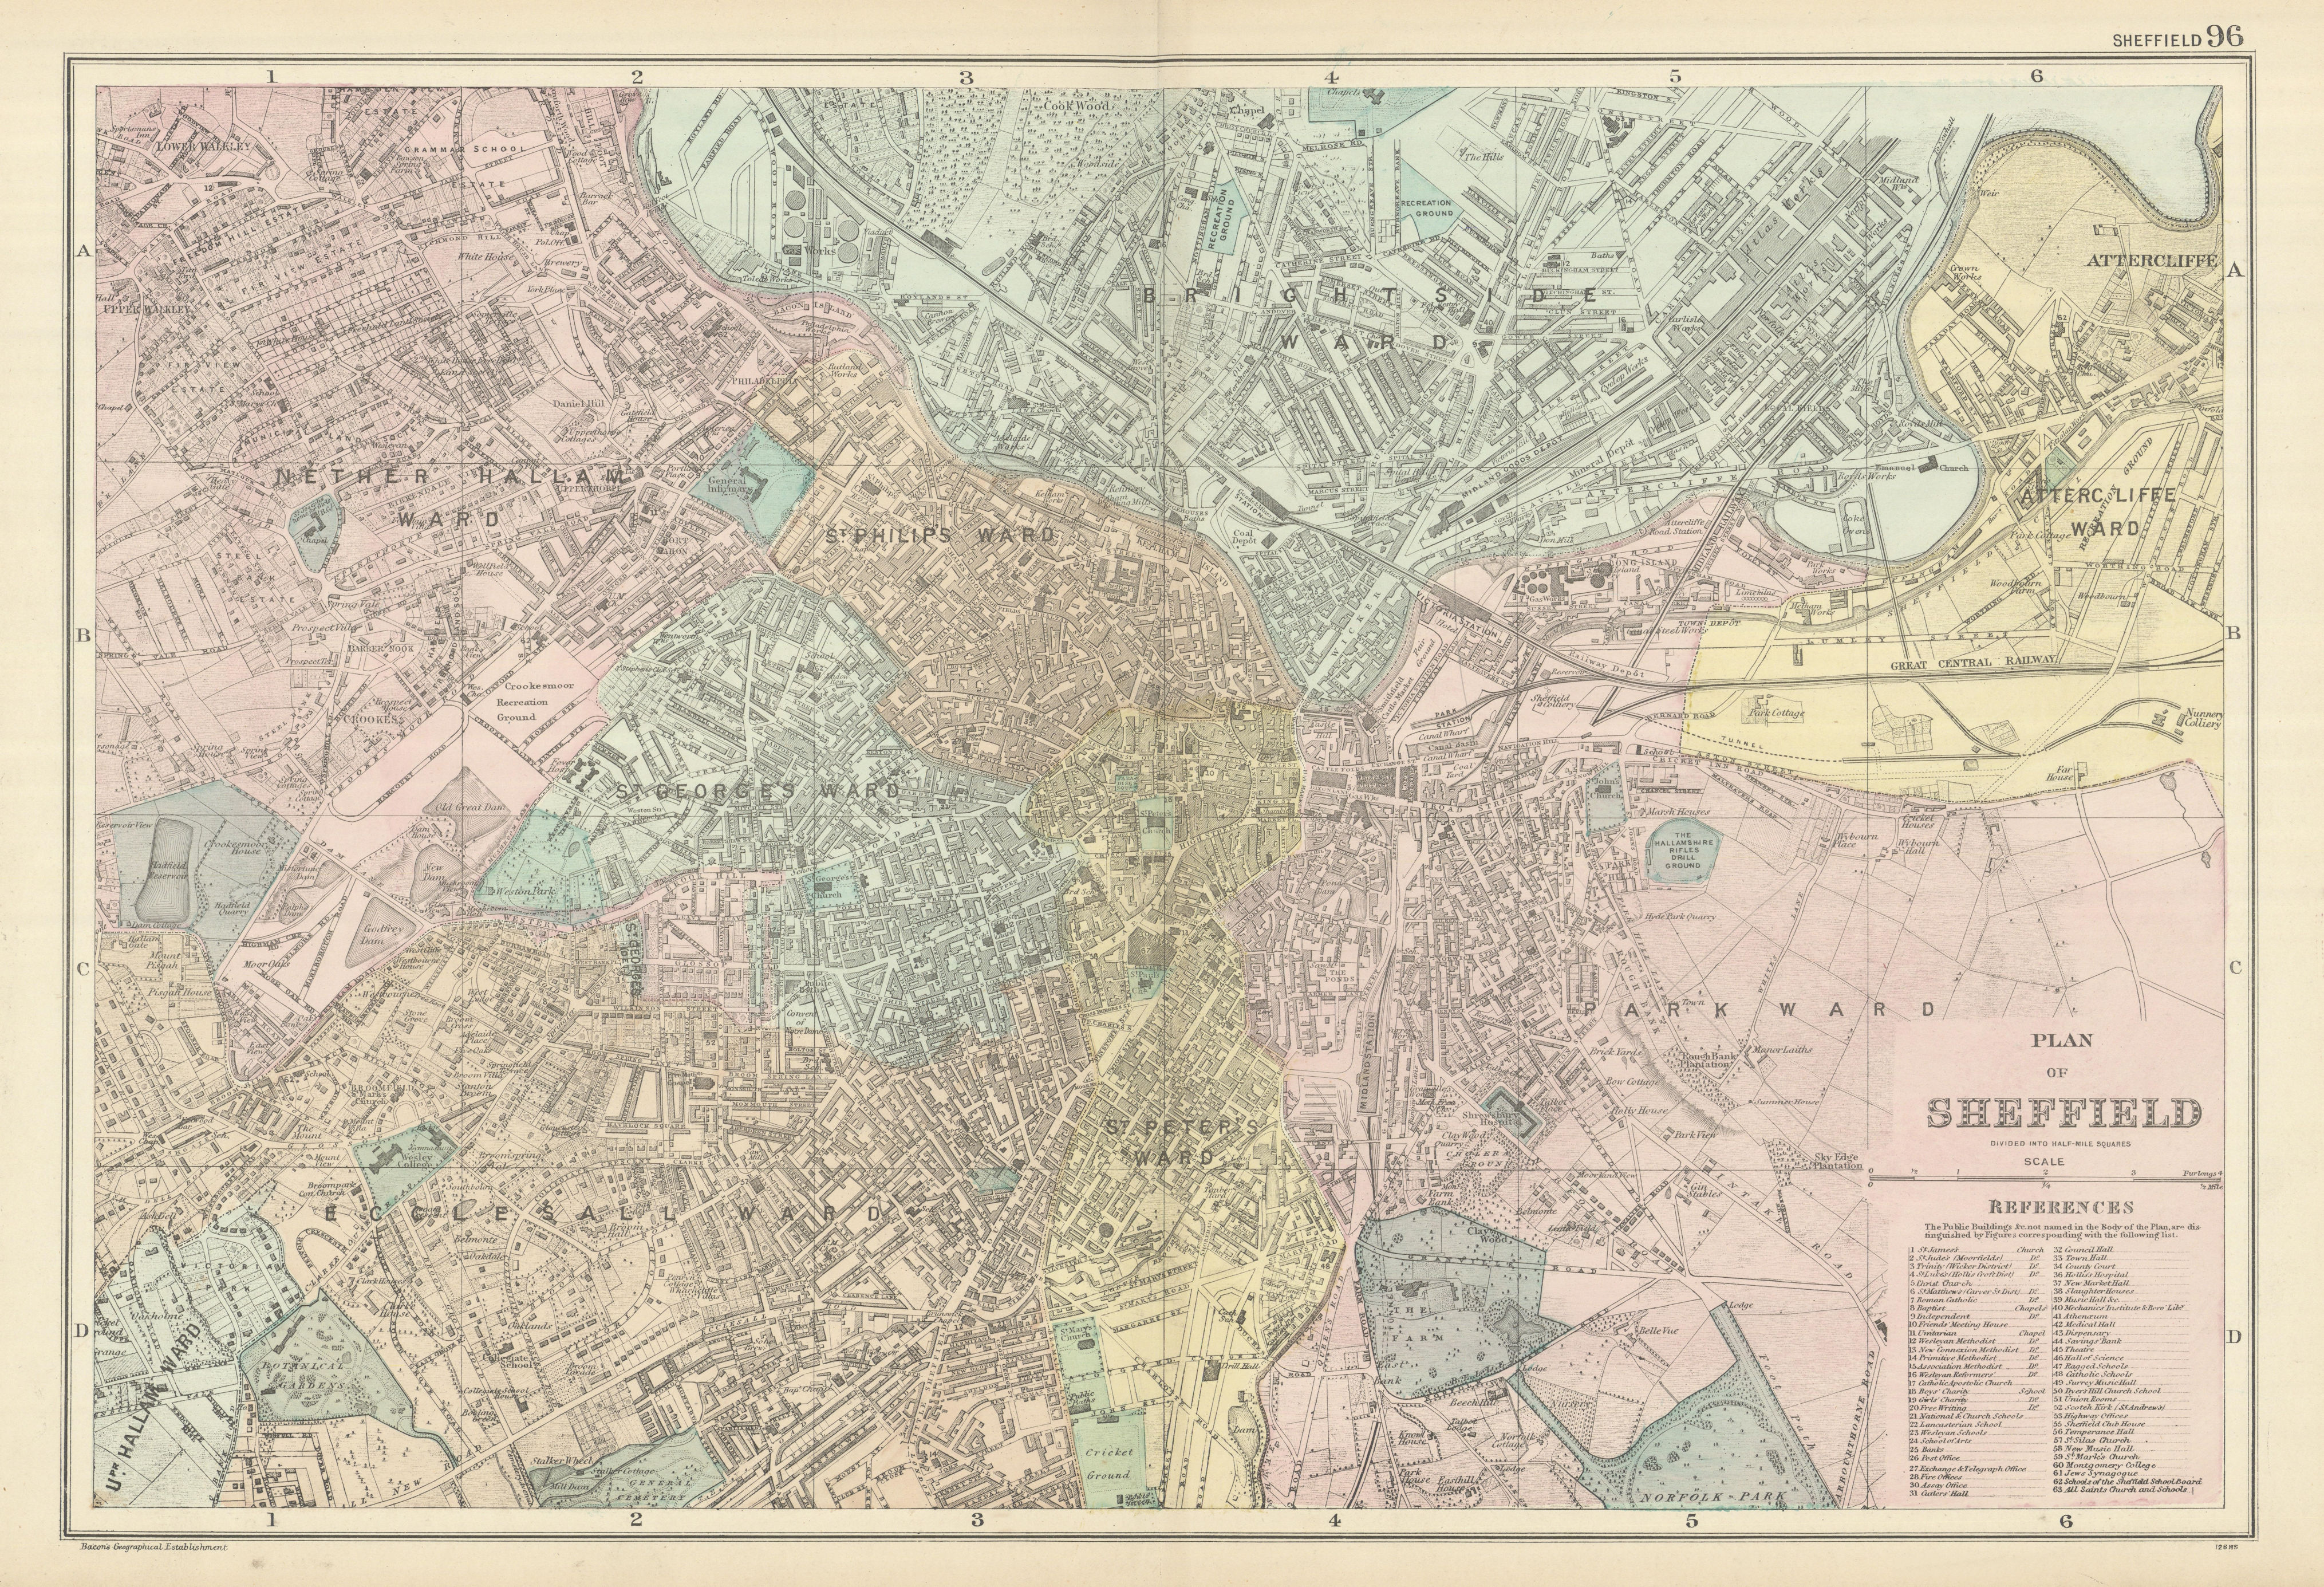 Associate Product SHEFFIELD town city plan Attercliffe Ecclesall Brightside Hallam. BACON 1898 map